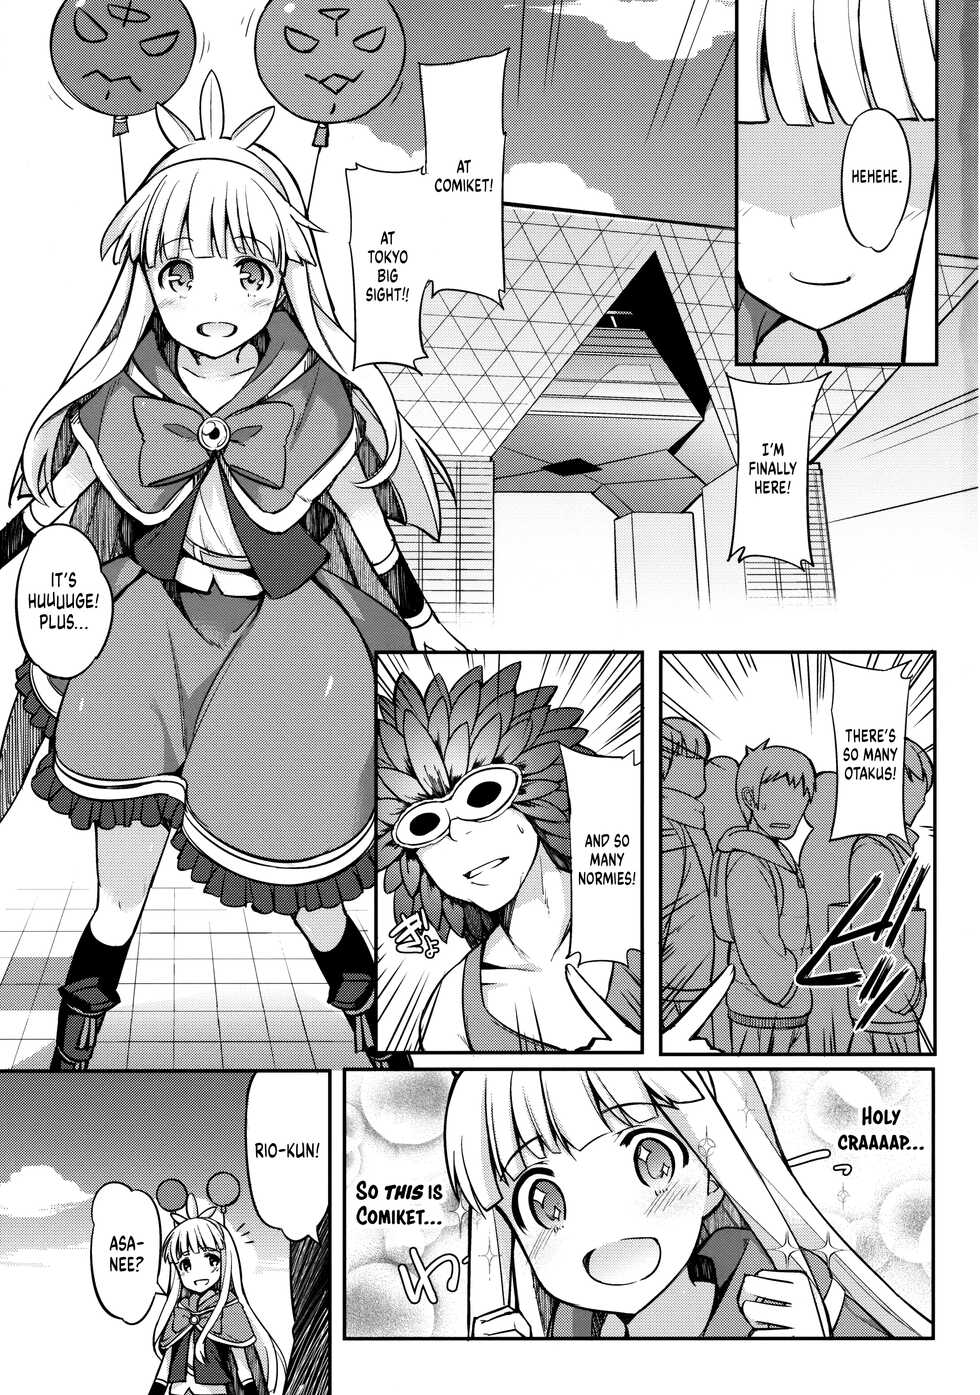 (SC2016 Winter) [H@BREAK (Itose Ikuto)] I Had a Cross Fate Episode at Comiket with an Onee-san I Met on Twitter and Spurted out Something Super Thick (Granblue Fantasy) [English] [head empty] - Page 2